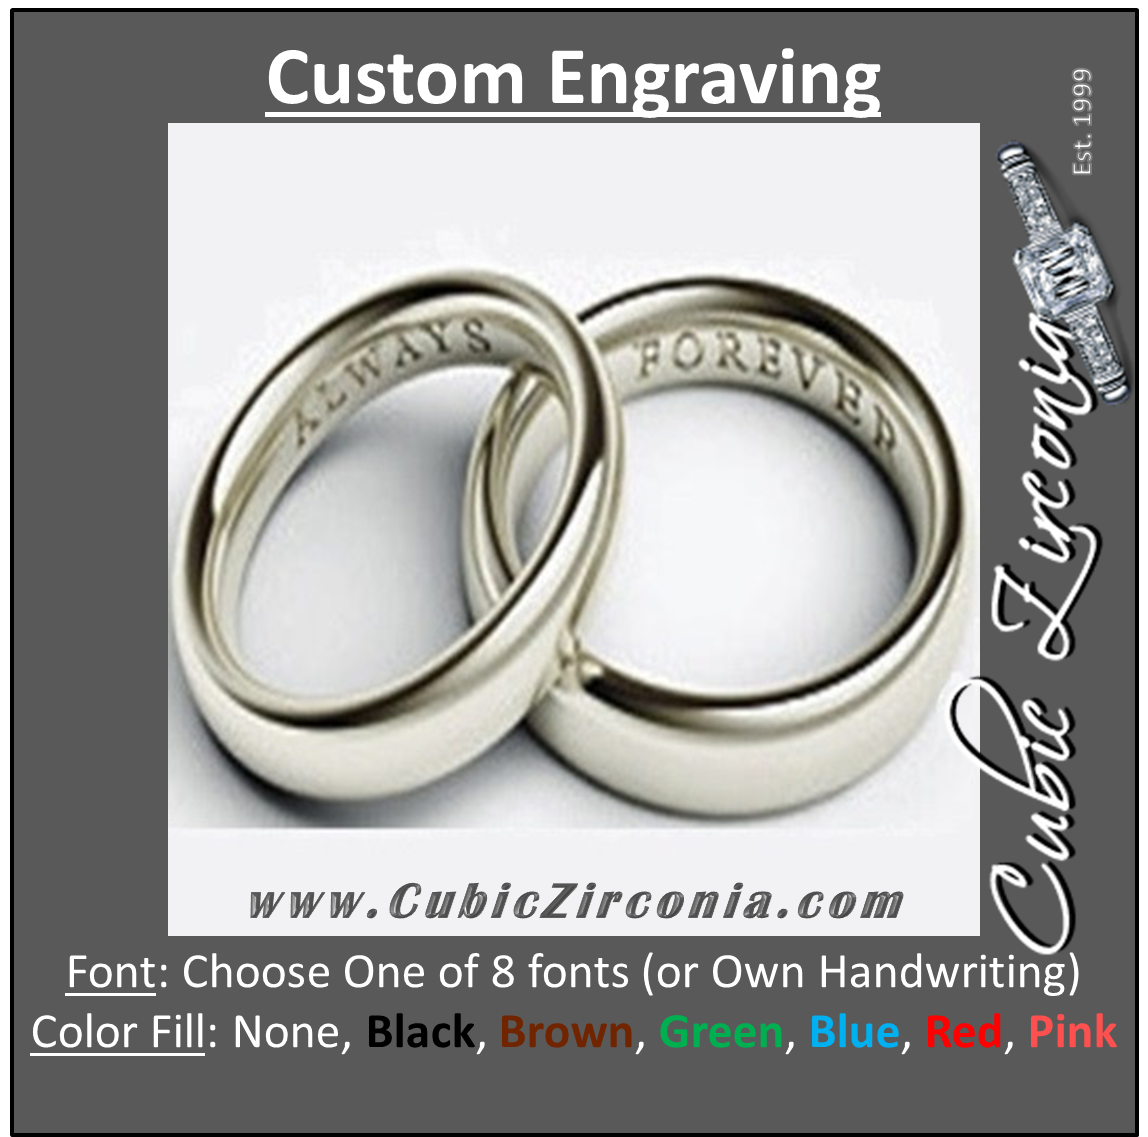 Our Custom Engraving for Rings, Wedding Bands, Cufflinks, Bracelets and More